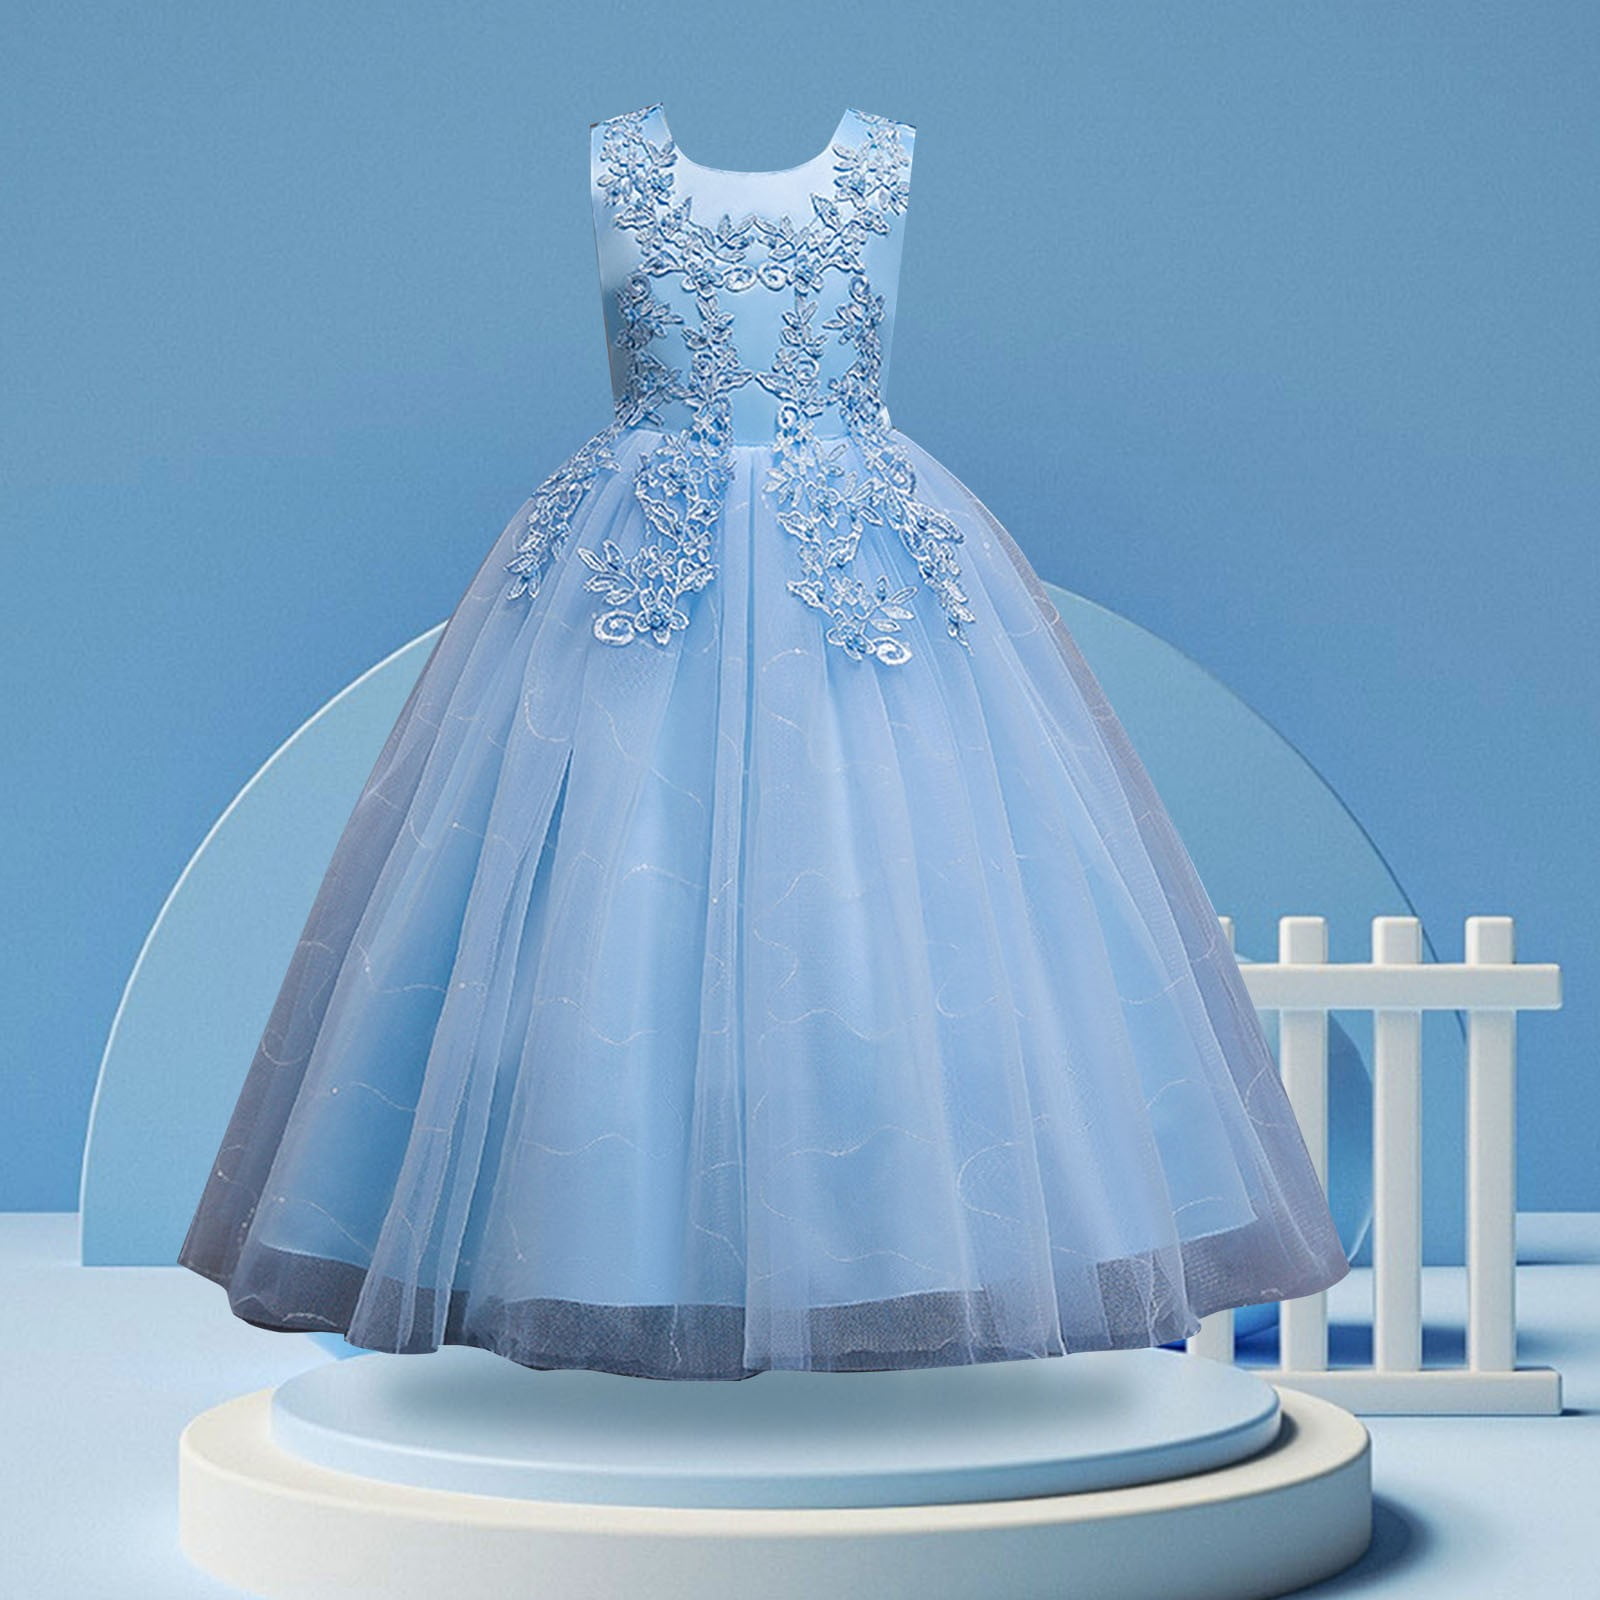 Flower Girl Blue Gown For Debut With Bow Knot In Perfect For Weddings,  Parties, And Online Shopping Style 180629022682 From Oiioq, $17.58 |  DHgate.Com